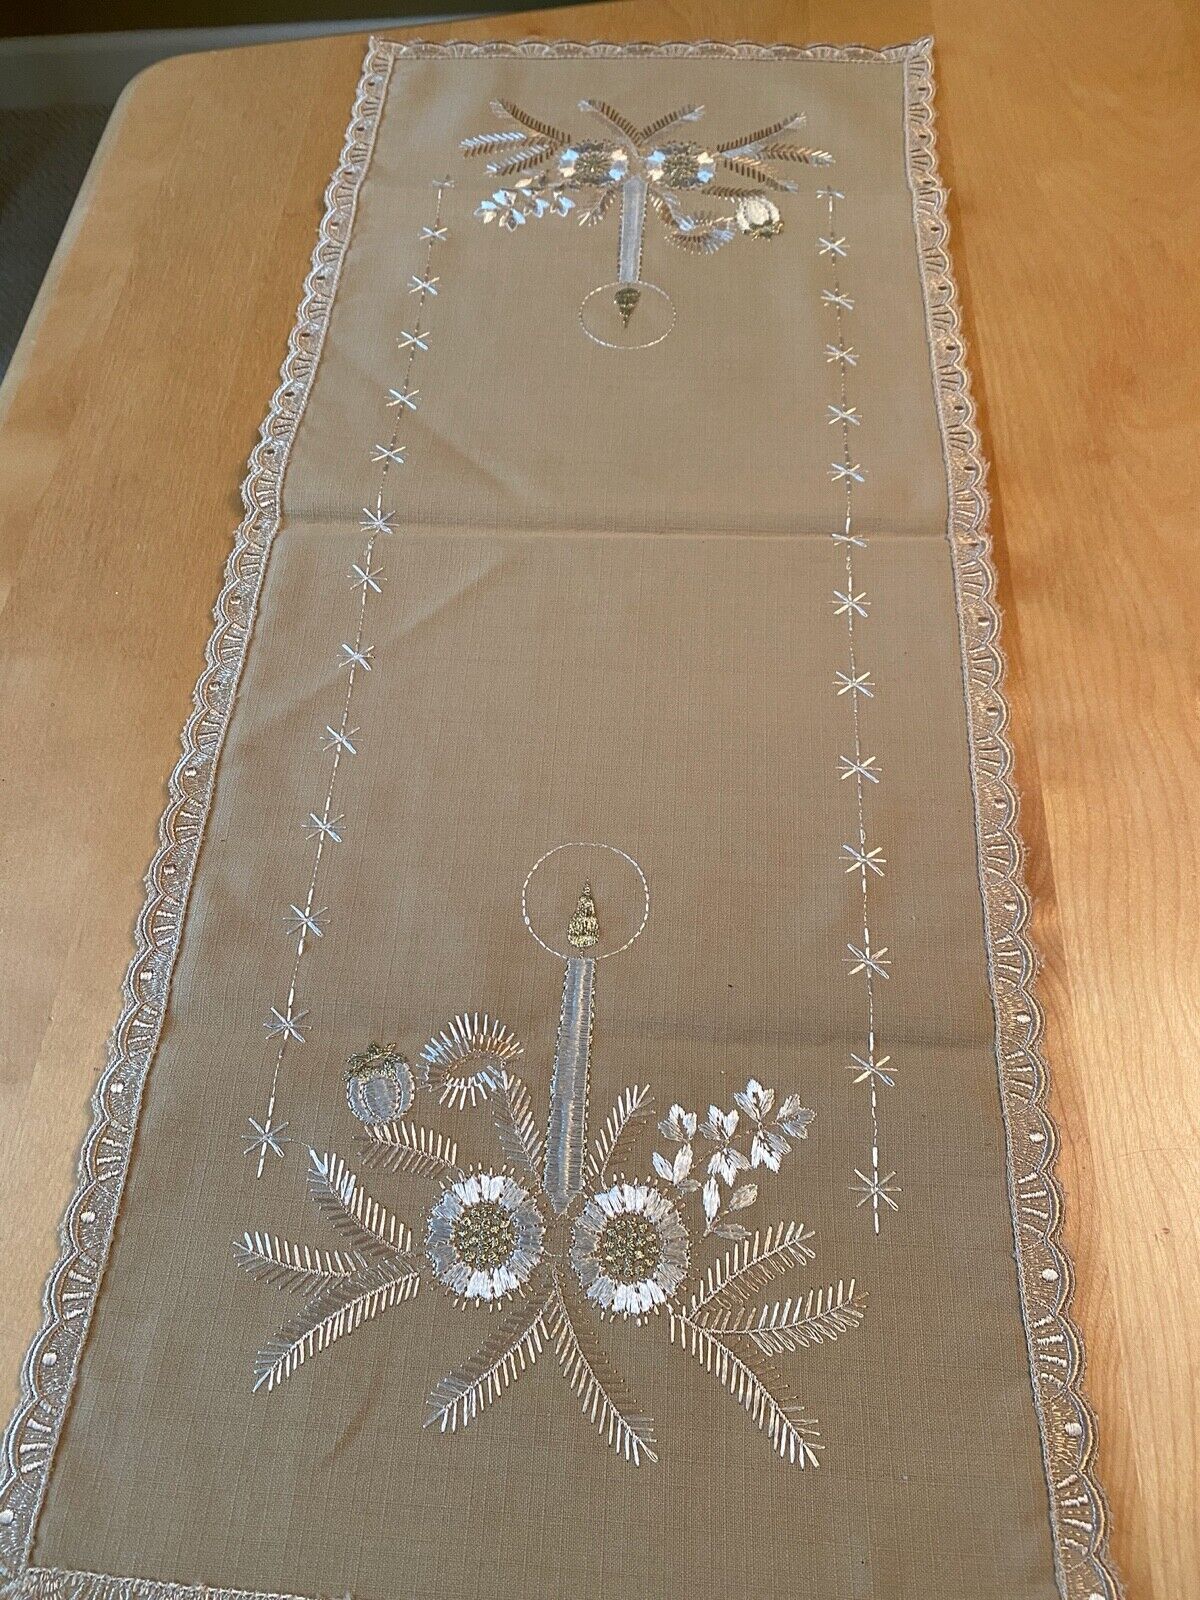 VINTAGE HAND EMBROIDERED TABLE RUNNER CANDLE THEME TAN WHITE 12